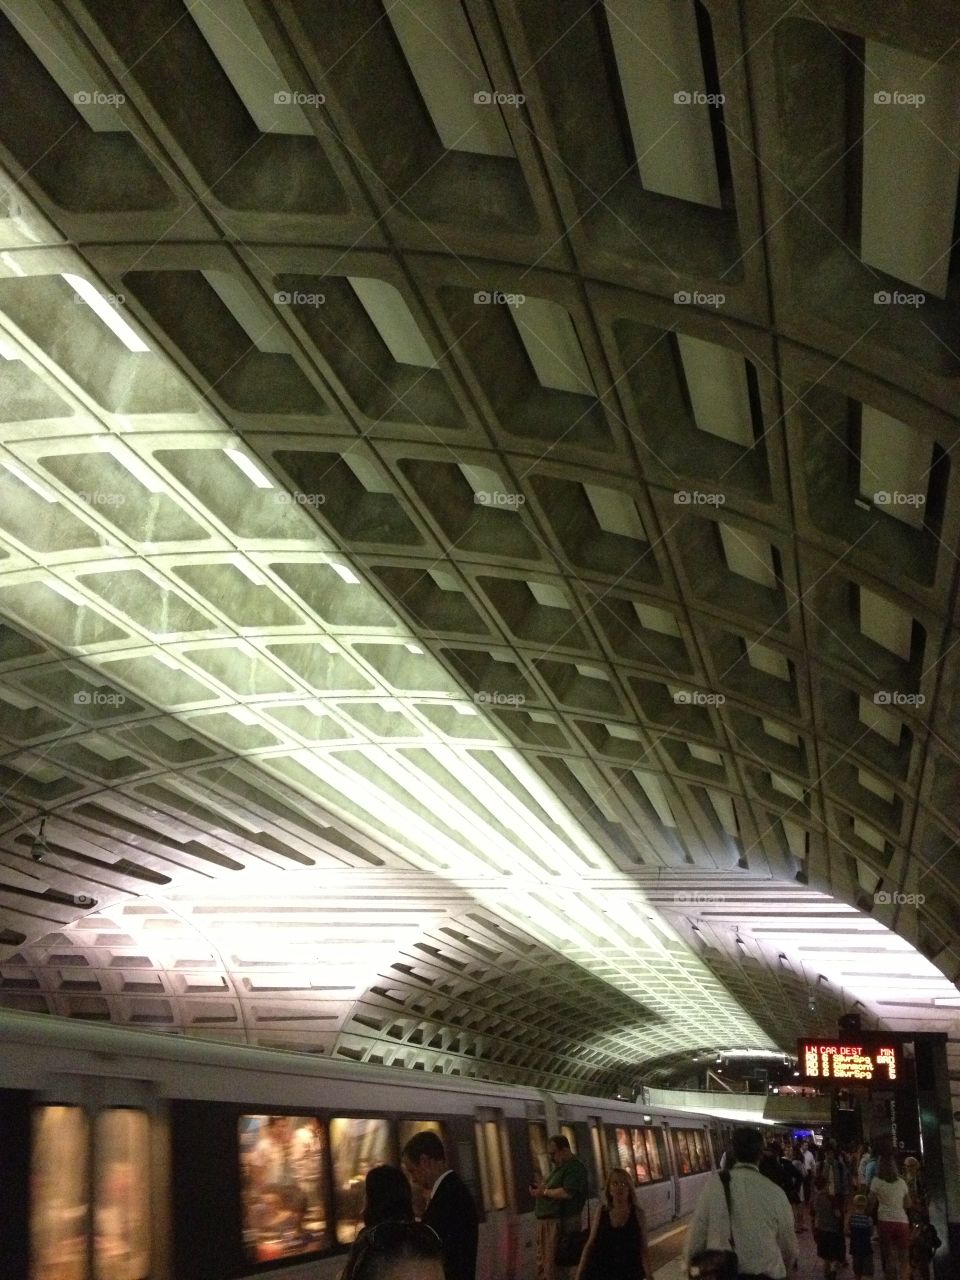 Subway in DC. Taken with iPhone 5, no editing or filters. 